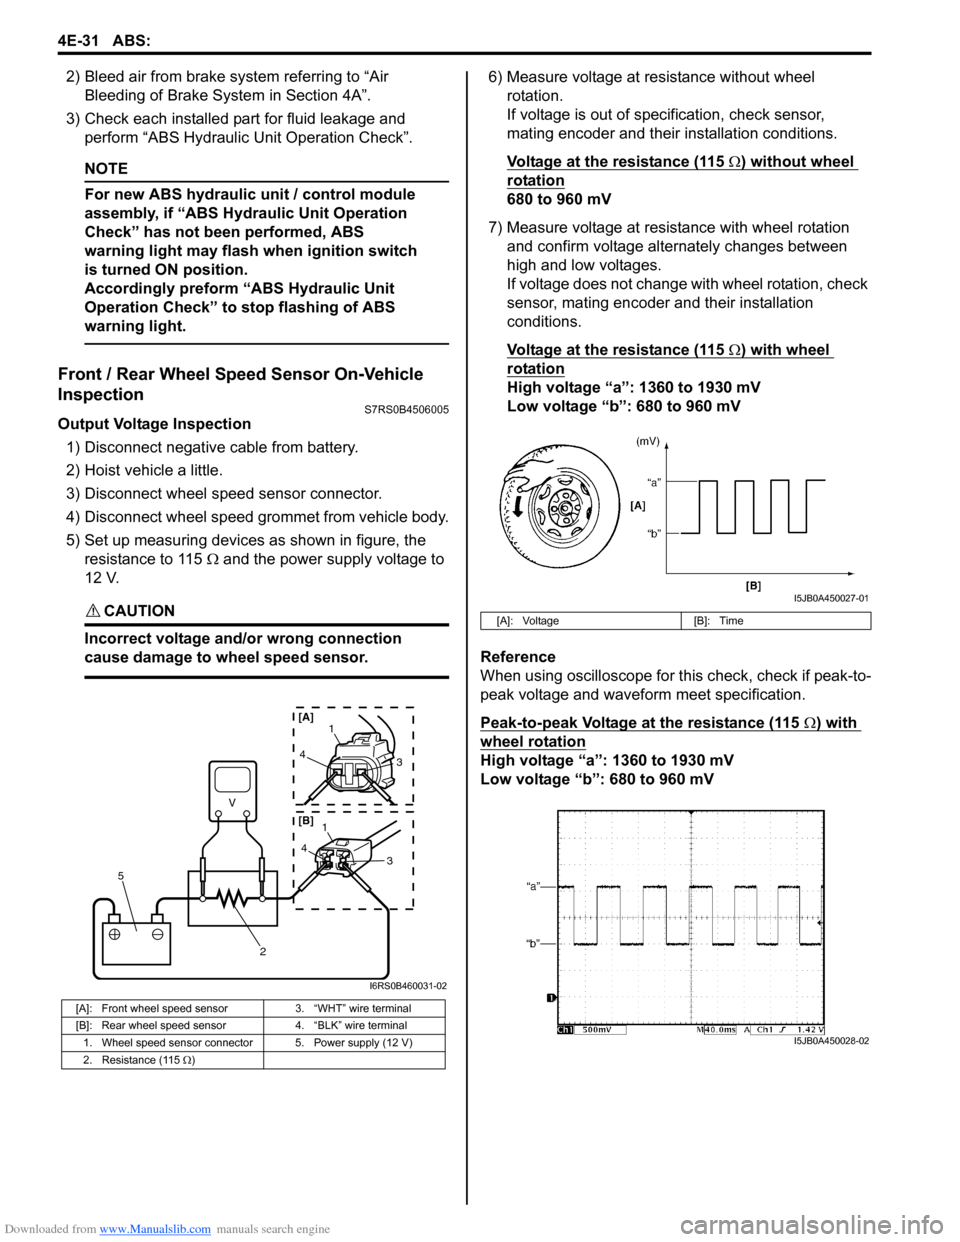 SUZUKI SWIFT 2006 2.G Service Repair Manual Downloaded from www.Manualslib.com manuals search engine 4E-31 ABS: 
2) Bleed air from brake system referring to “Air Bleeding of Brake System in Section 4A”.
3) Check each installed part for flui